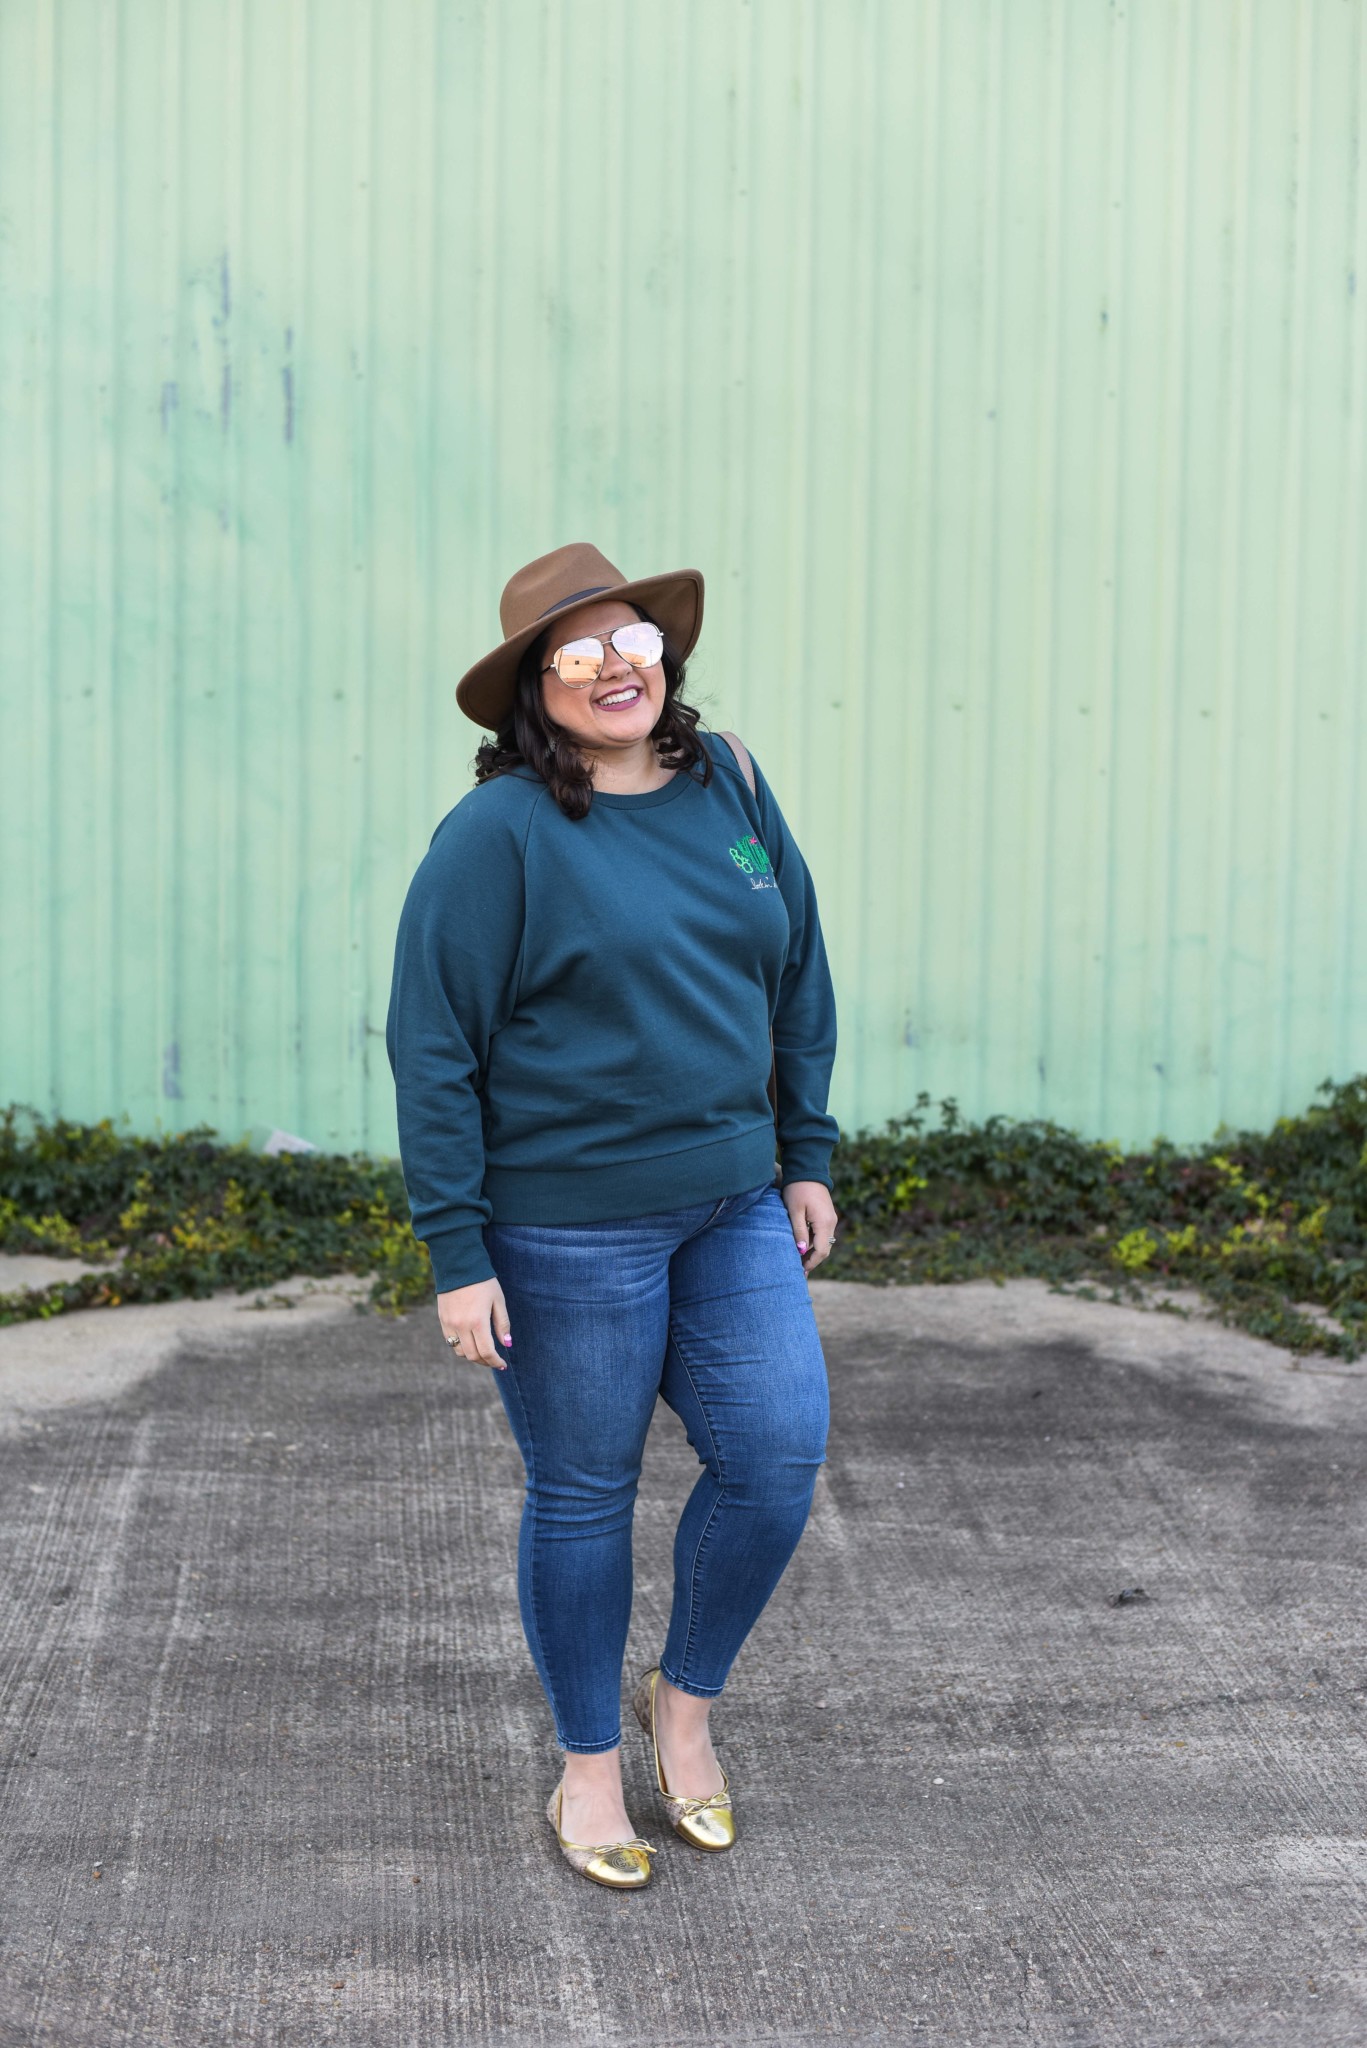 Running errands doesn't mean I have to dress boring. Today I'm styling a plus size embroidered sweatshirt two ways. 